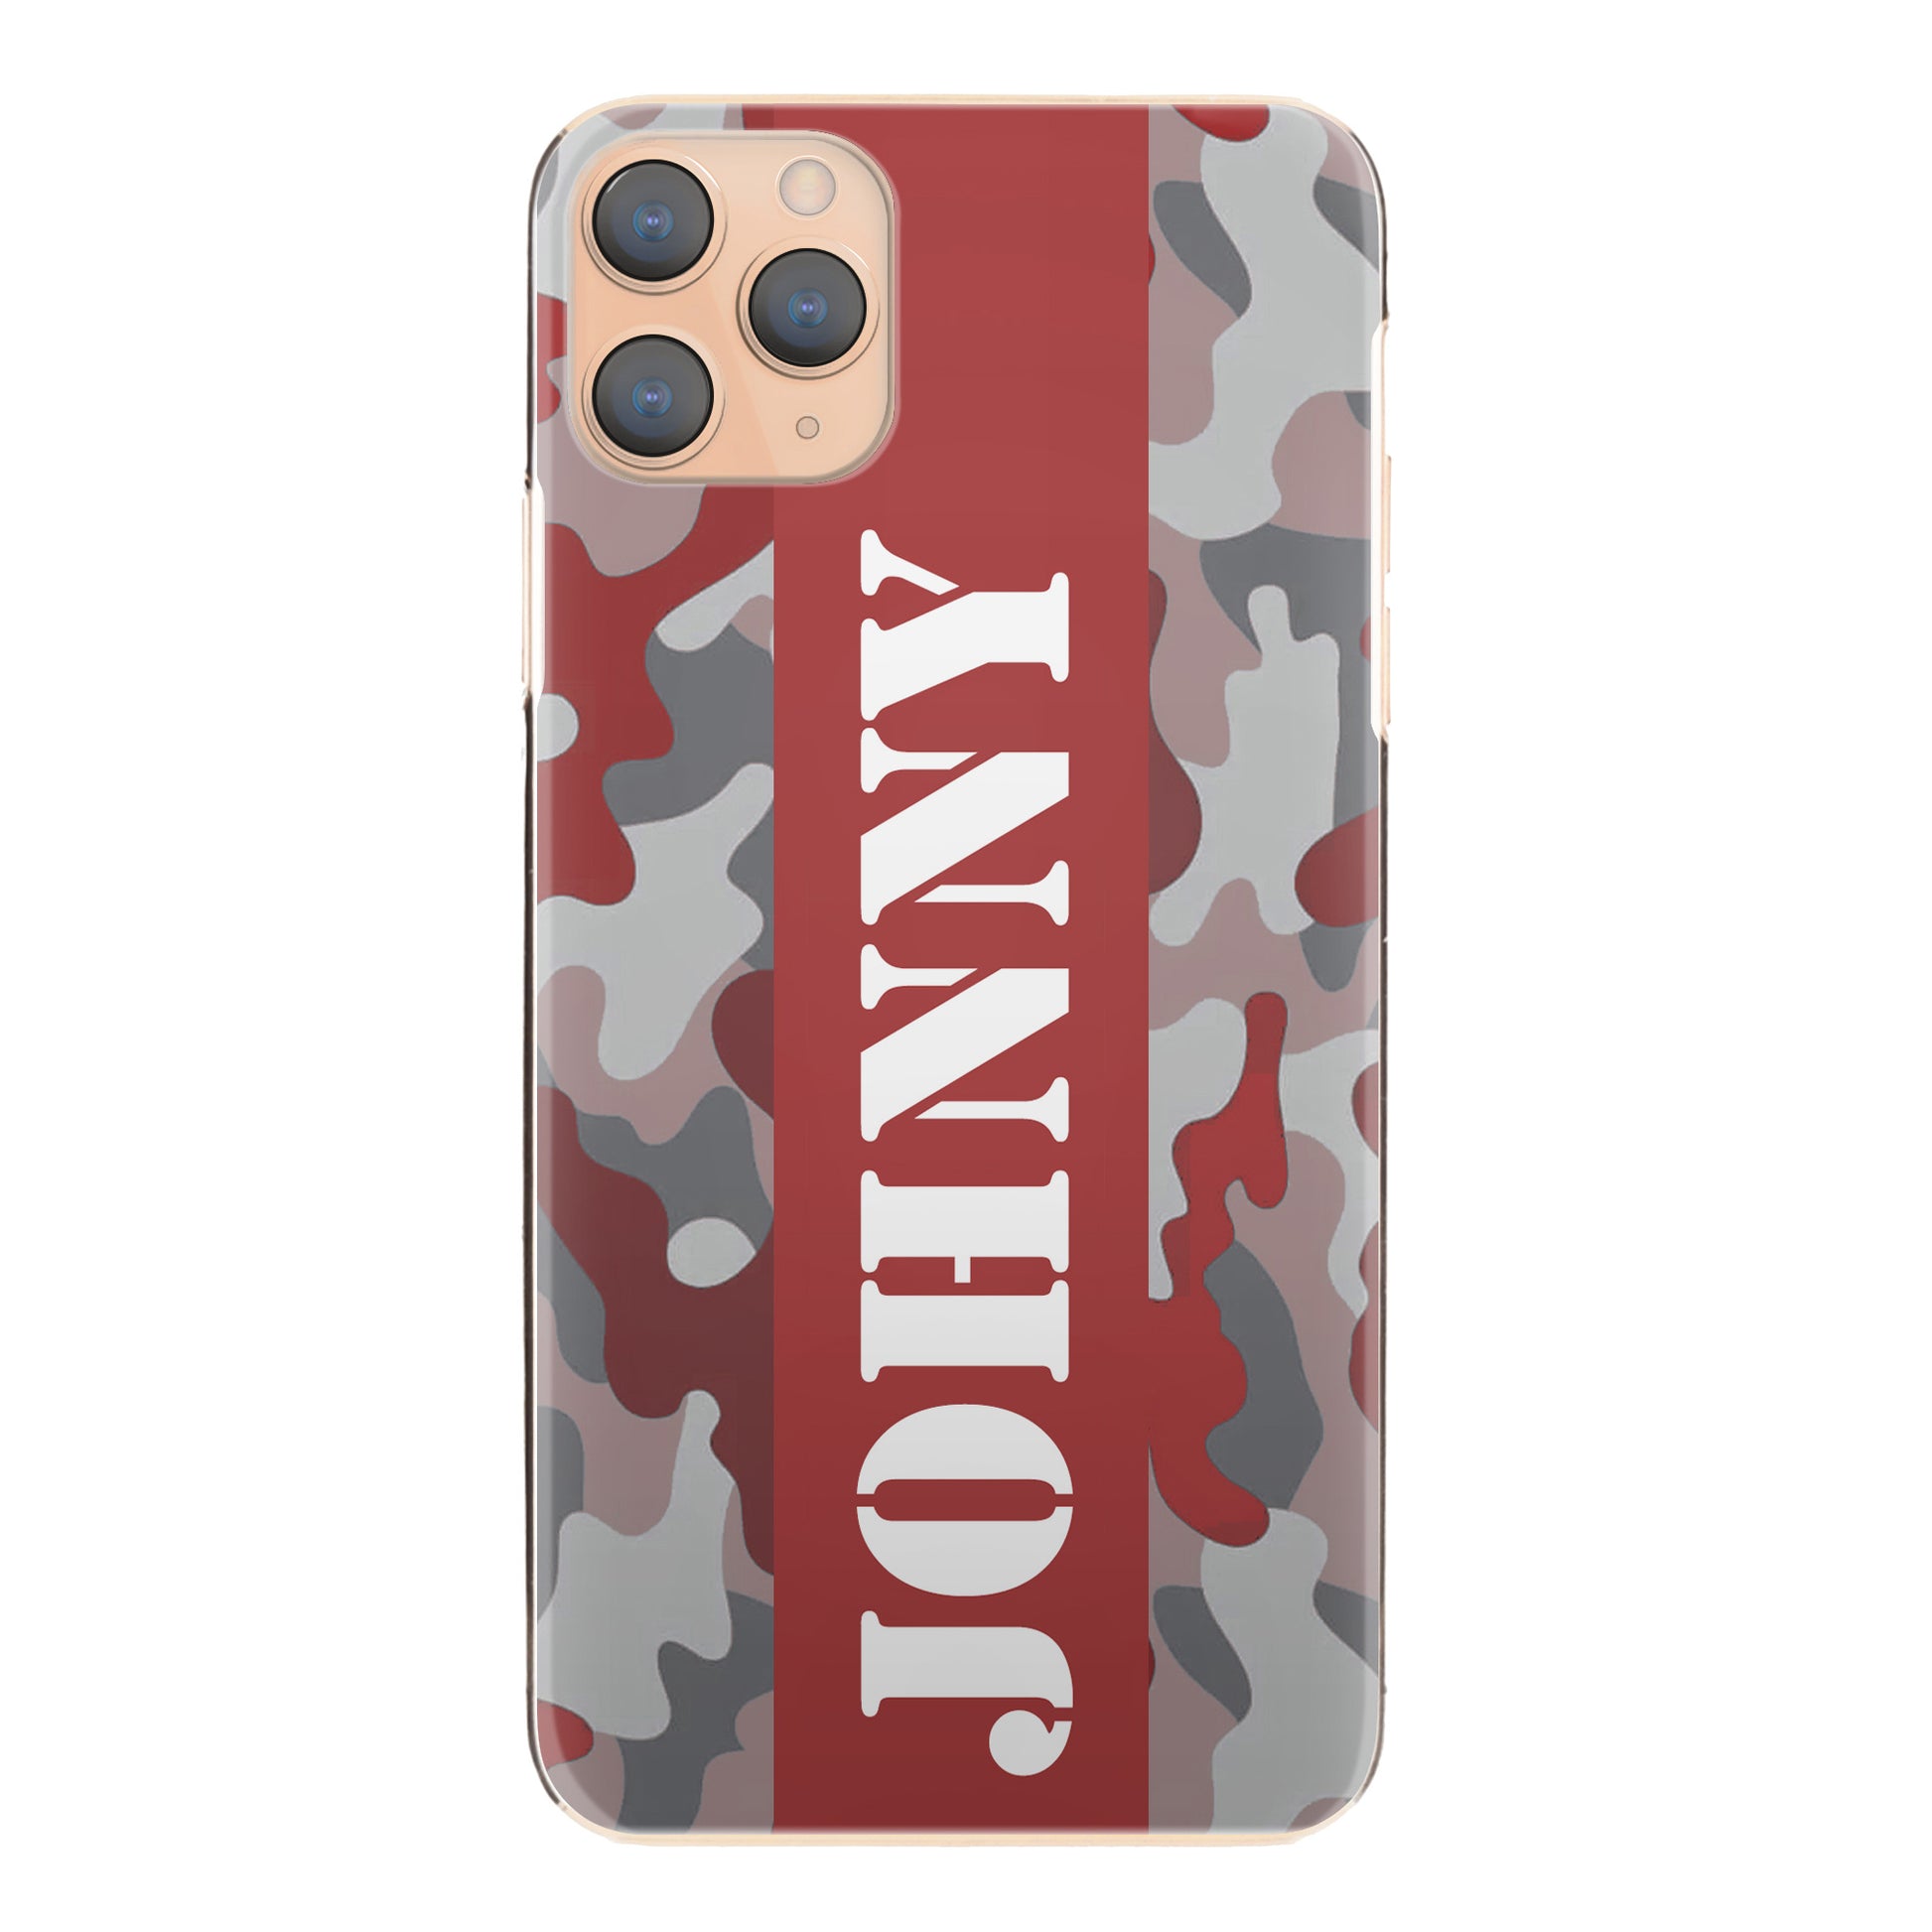 Personalised HTC Phone Hard Case with Military Text on Red Camo